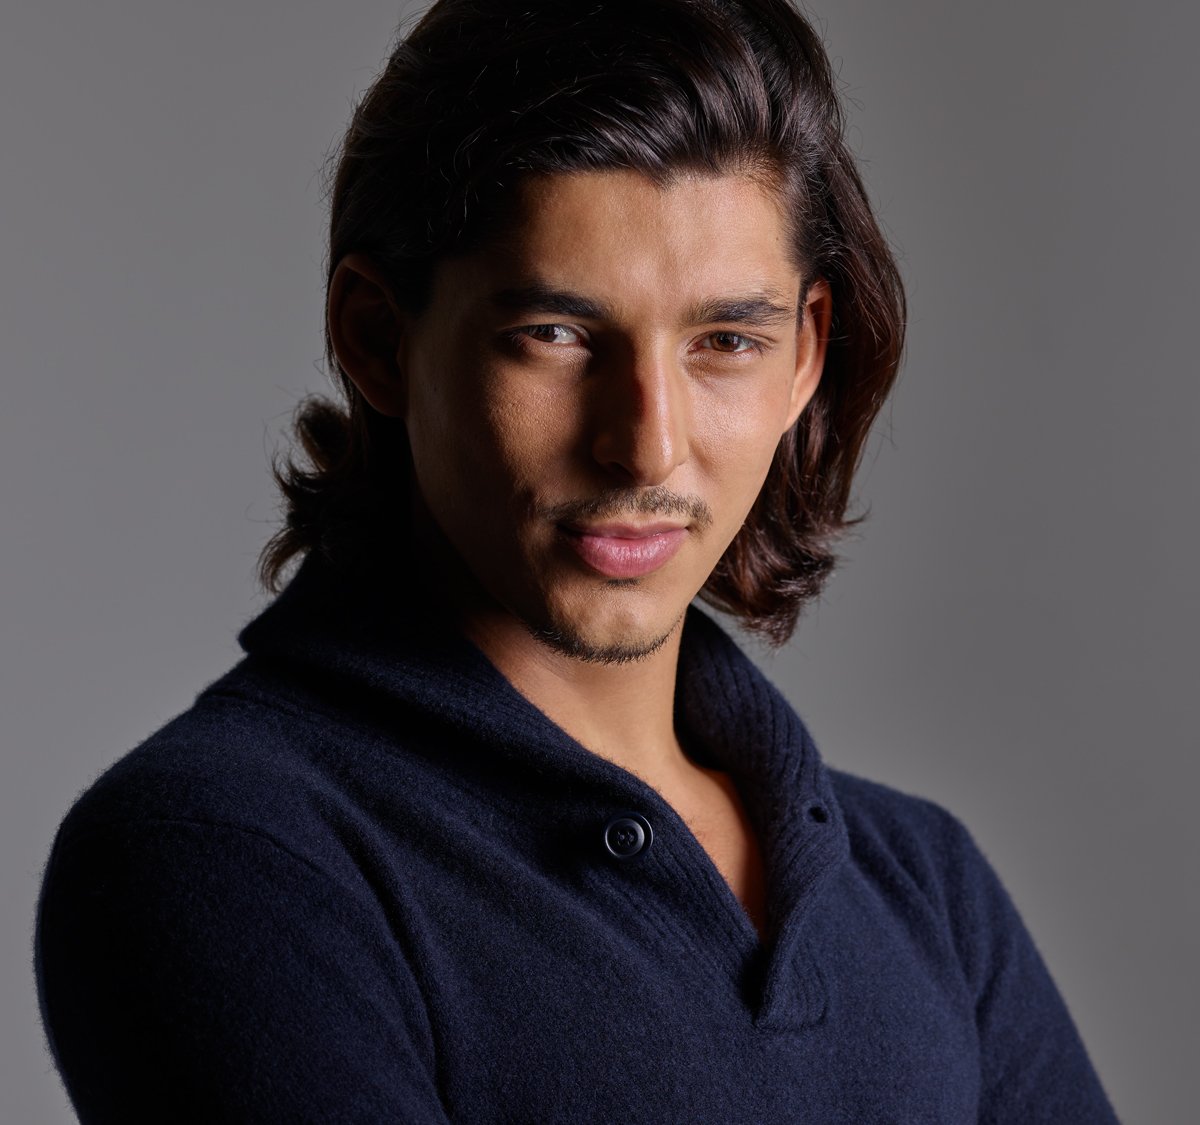 Professional headshot of a male artist with dark long hair wearing a blue sweater taken at NYC Headshot.